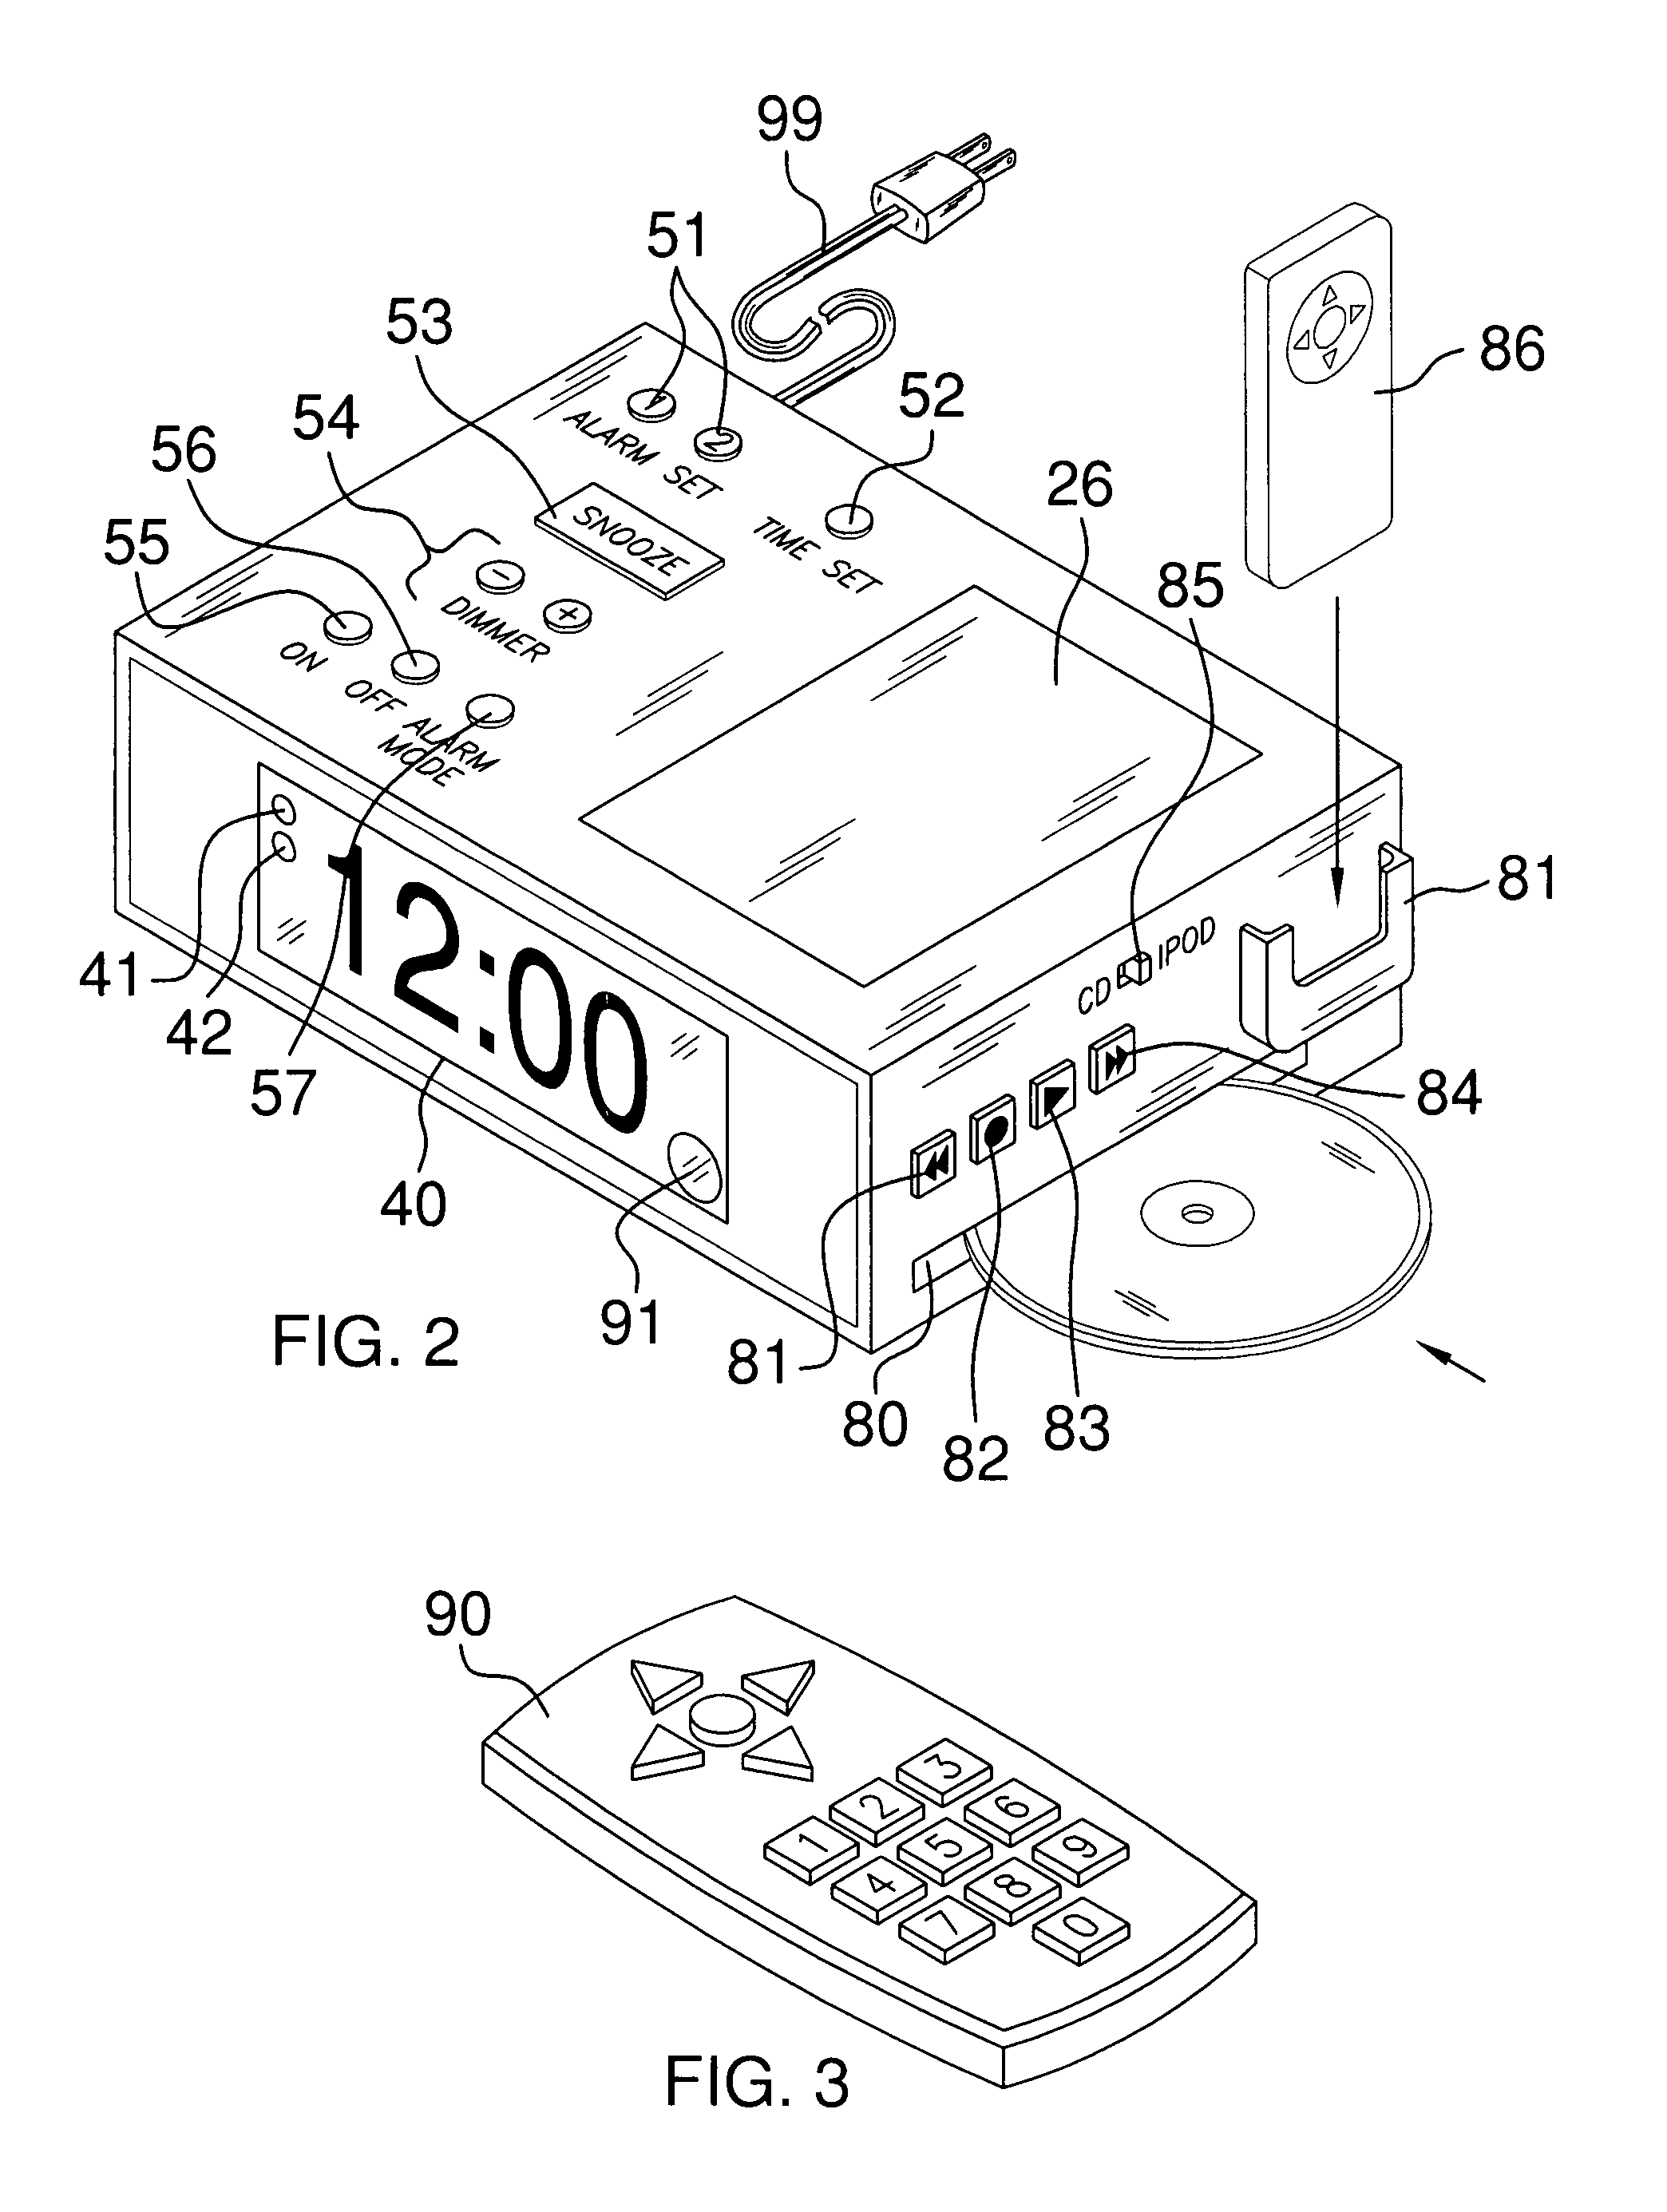 Alarm clock with AM/FM radio, CD player, portable audio storage device docking input, battery backup, and keypad with folding cover